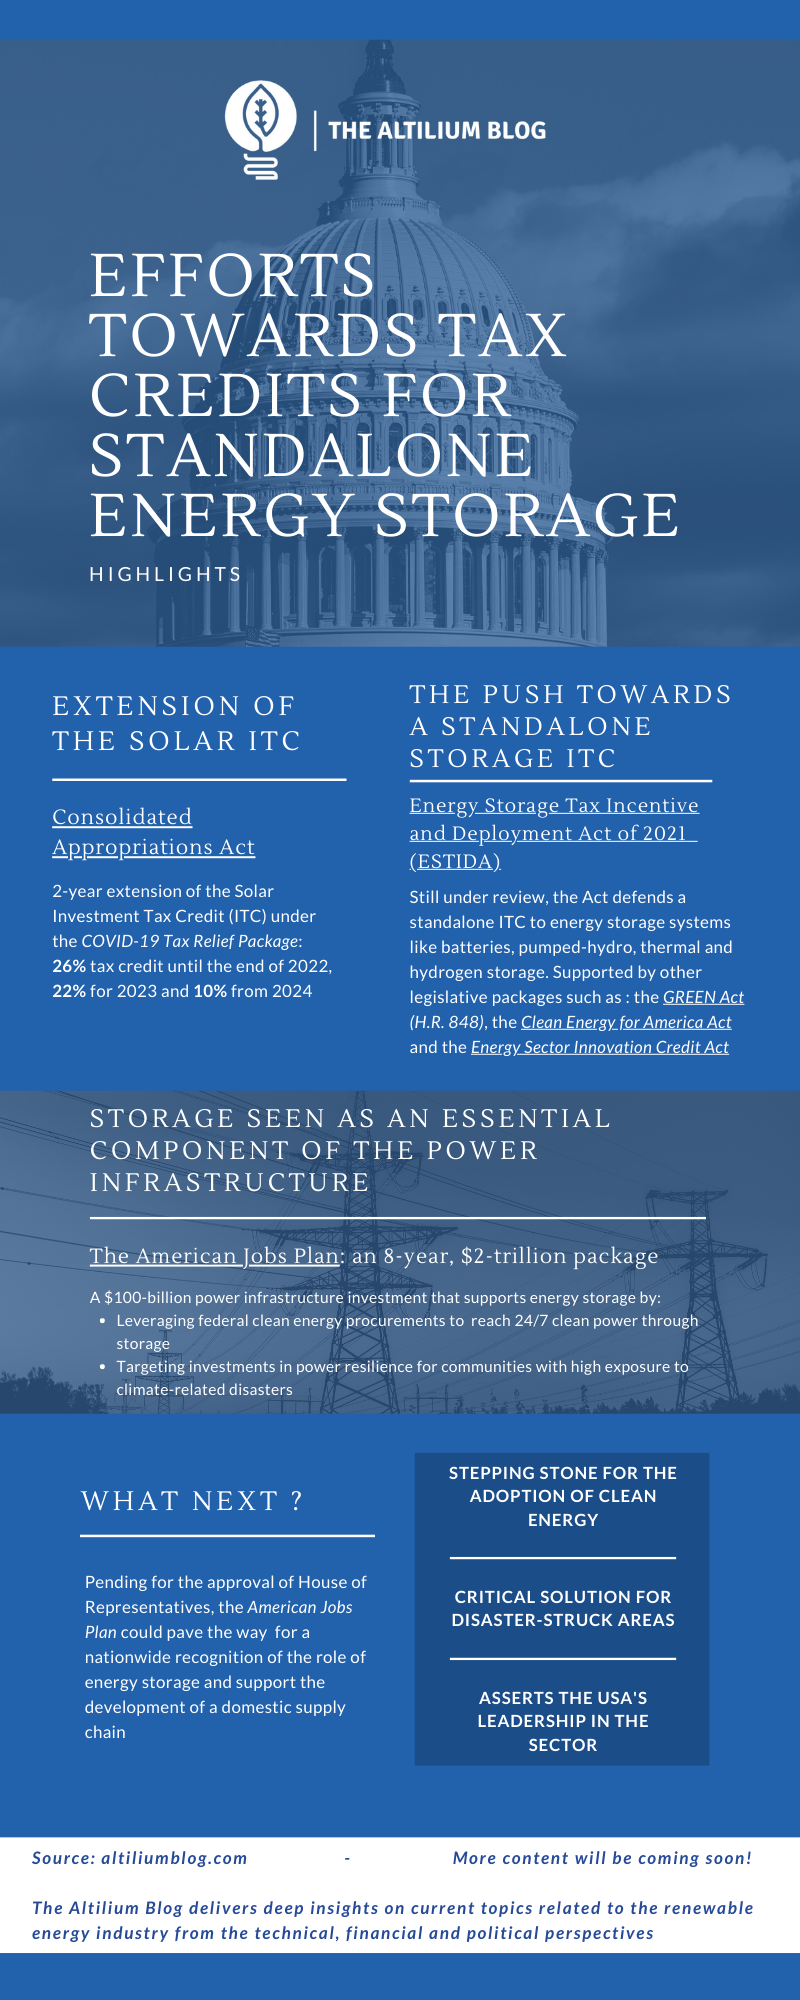 Efforts towards tax credits for standalone energy storage in the United States